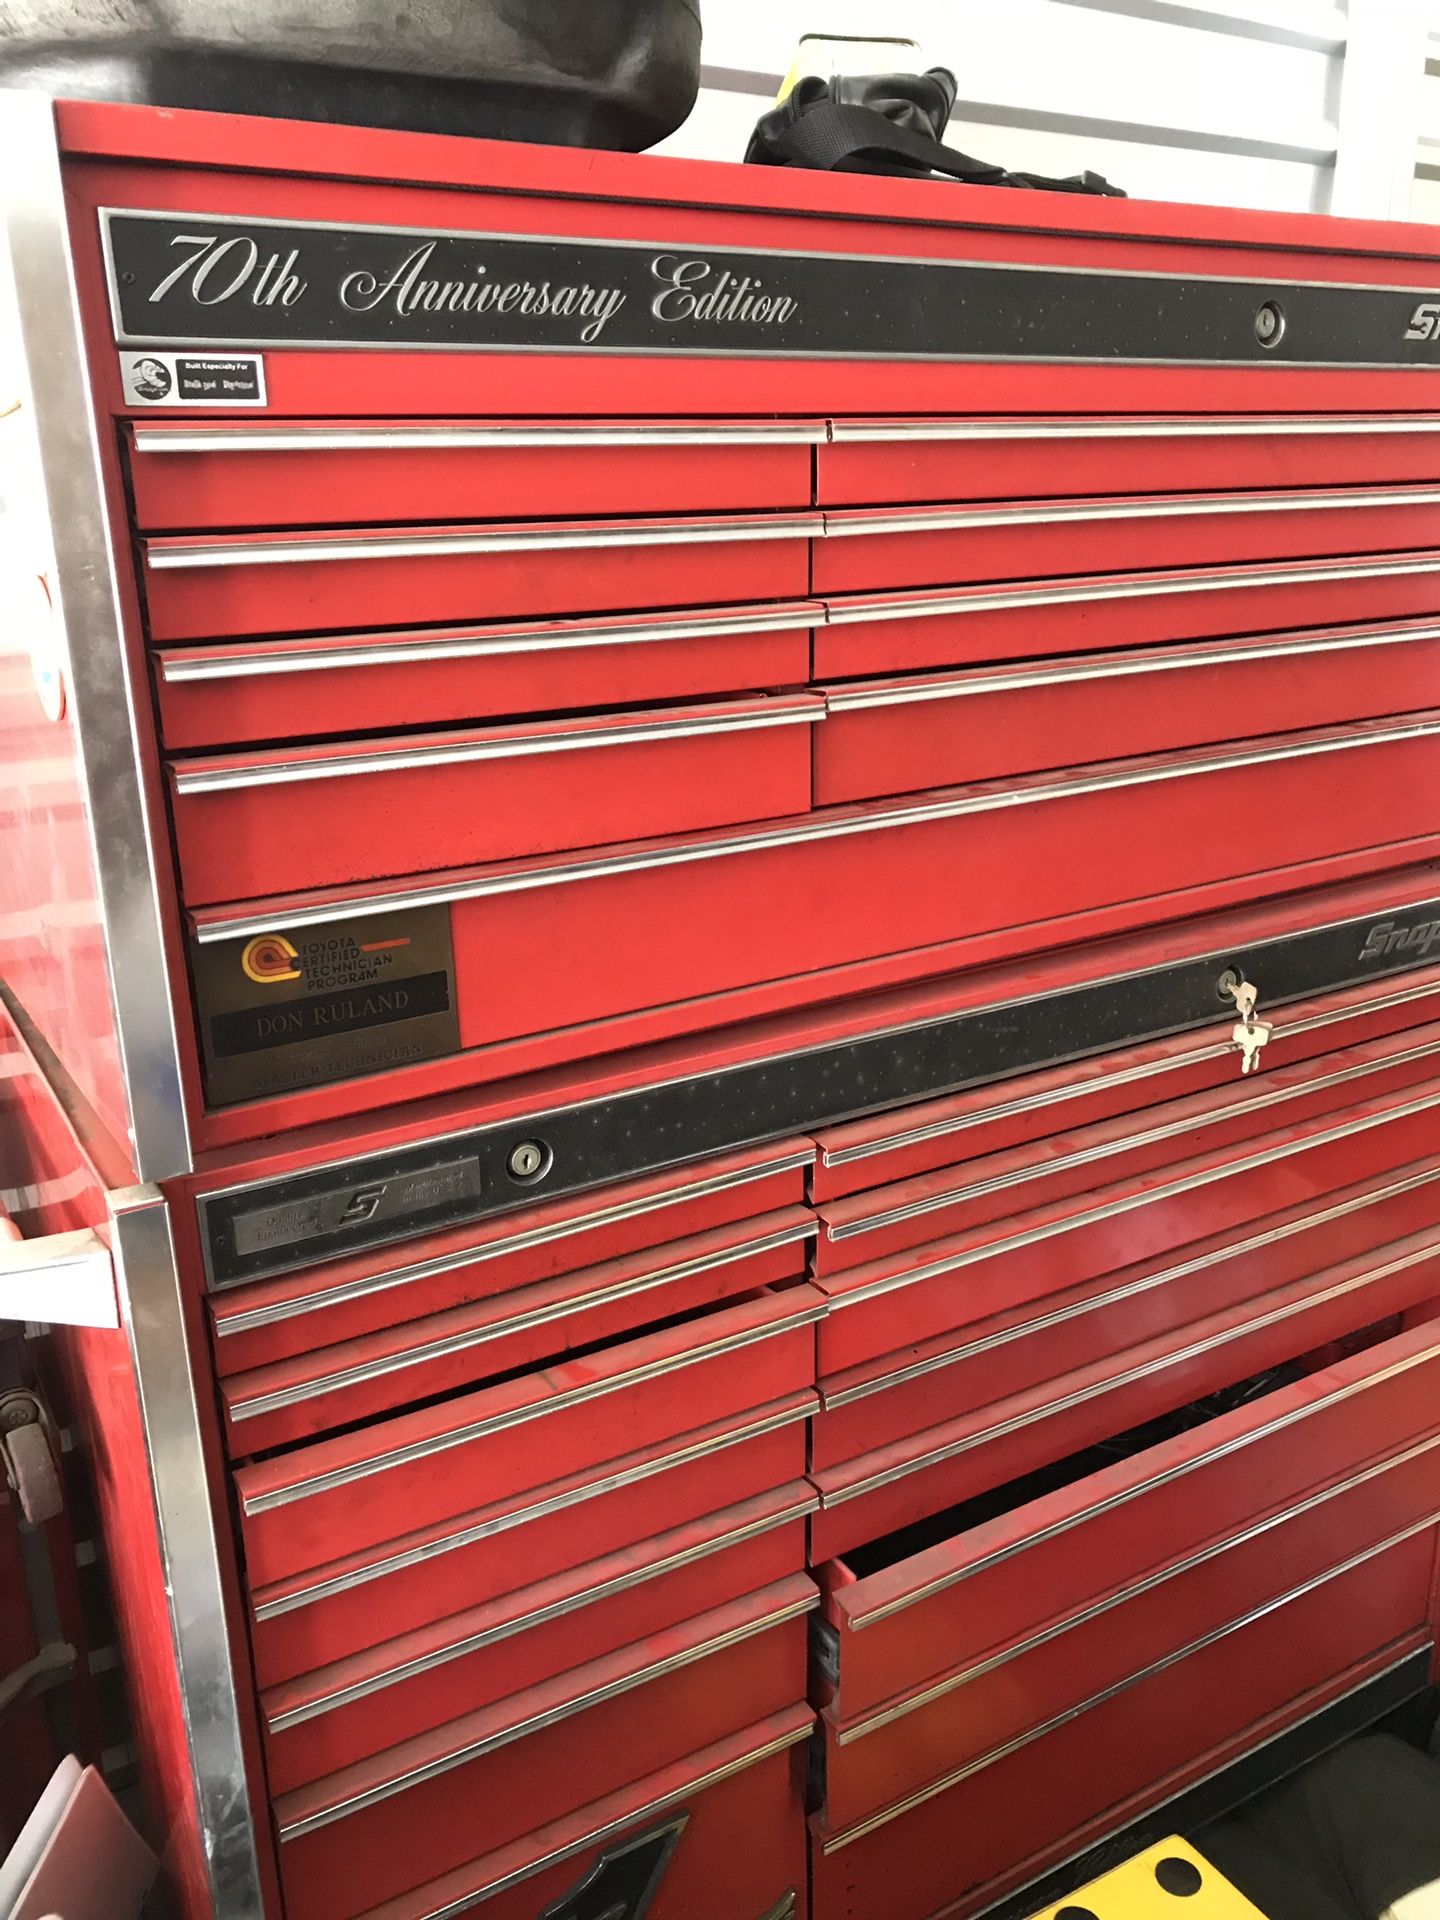 Snap-On 70th anniversary tool box mechanic rolling box in good condition with key mechanic mechanical auto repair tools